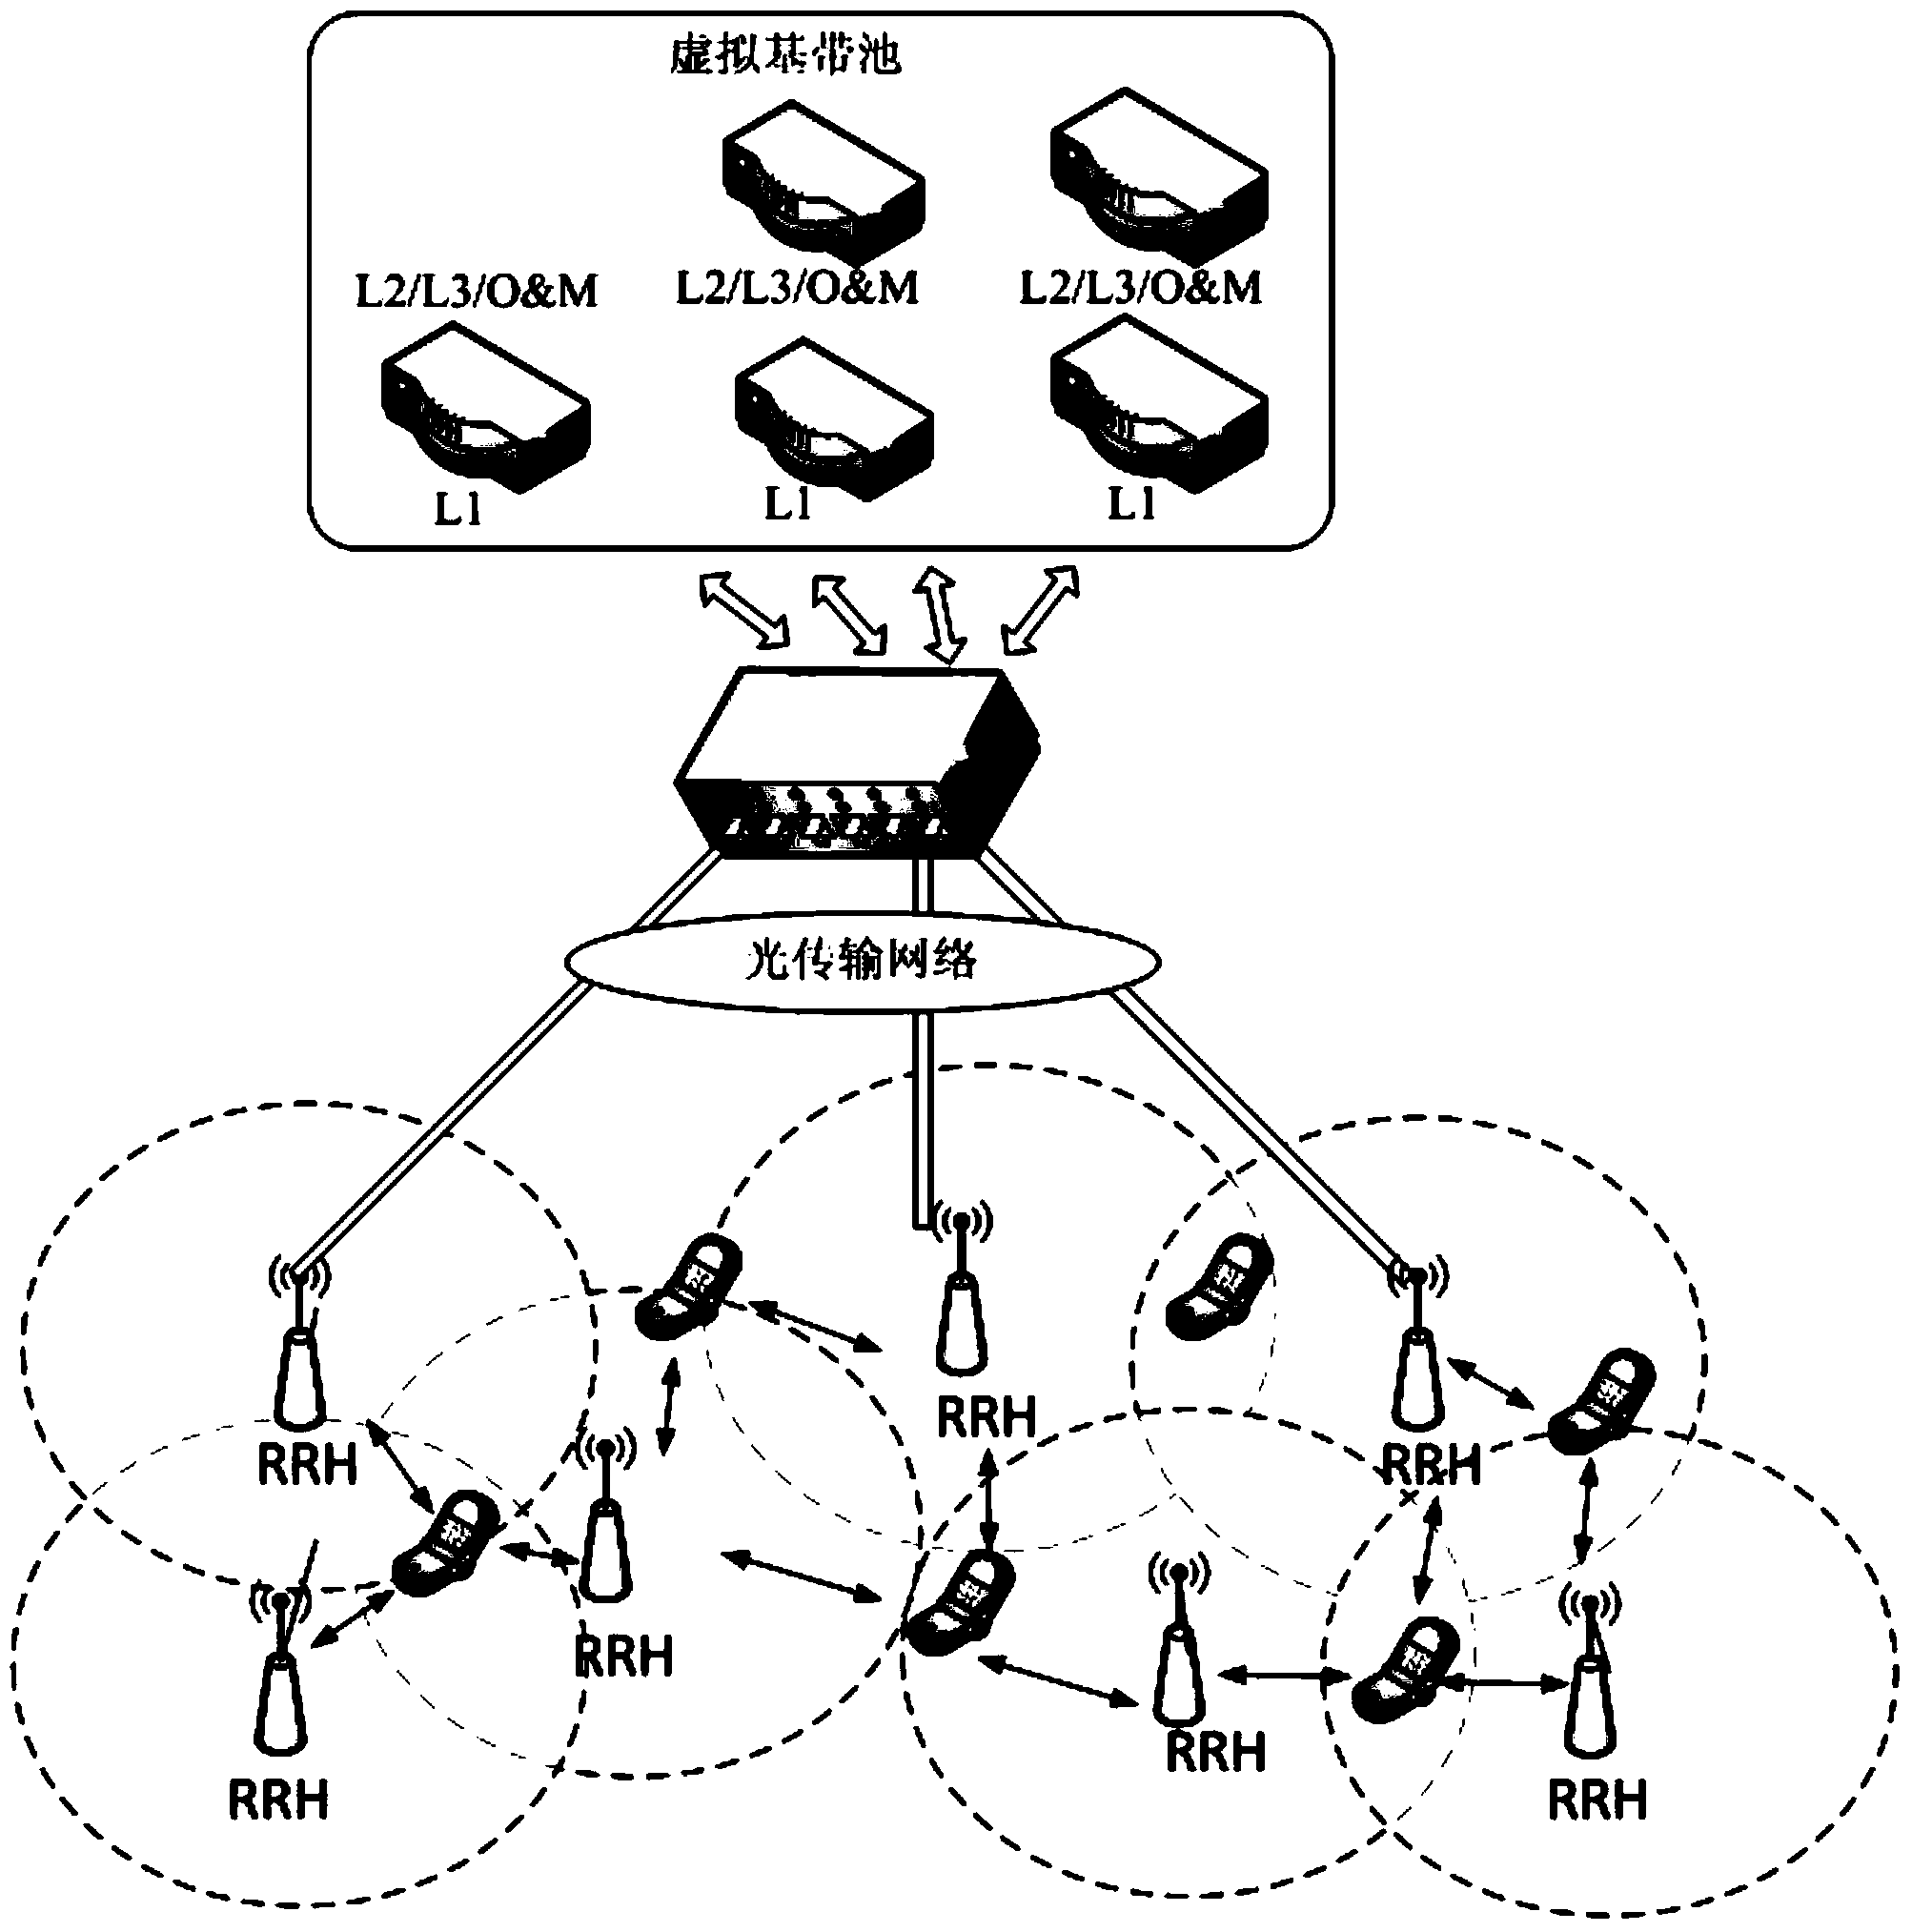 Method for detecting energy consumption of LTE wireless private network based on C-RAN architecture